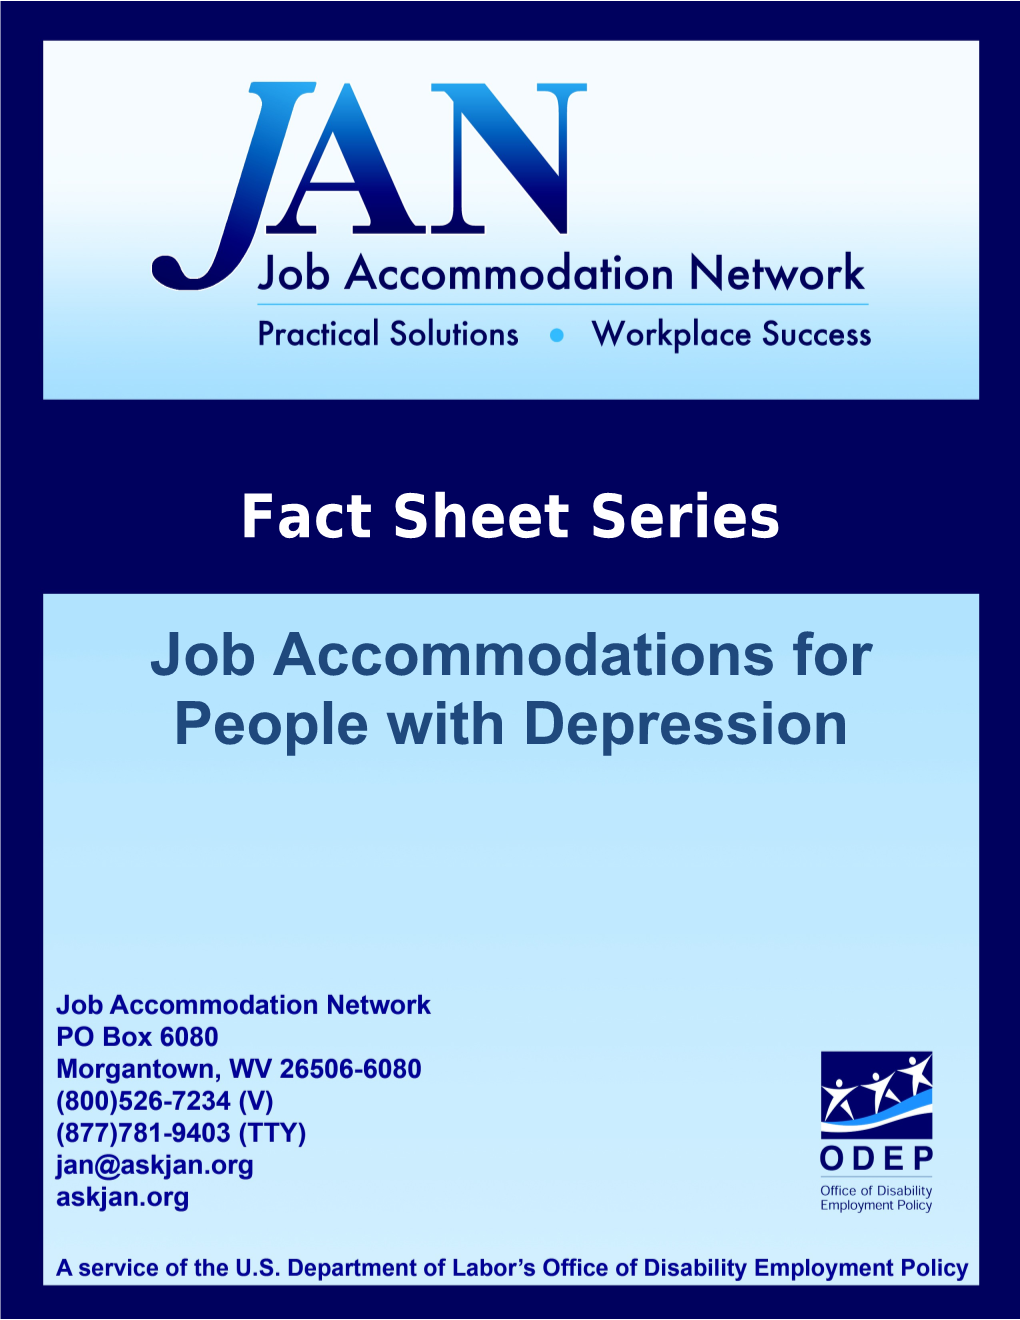 Job Accommodations for People with Depression